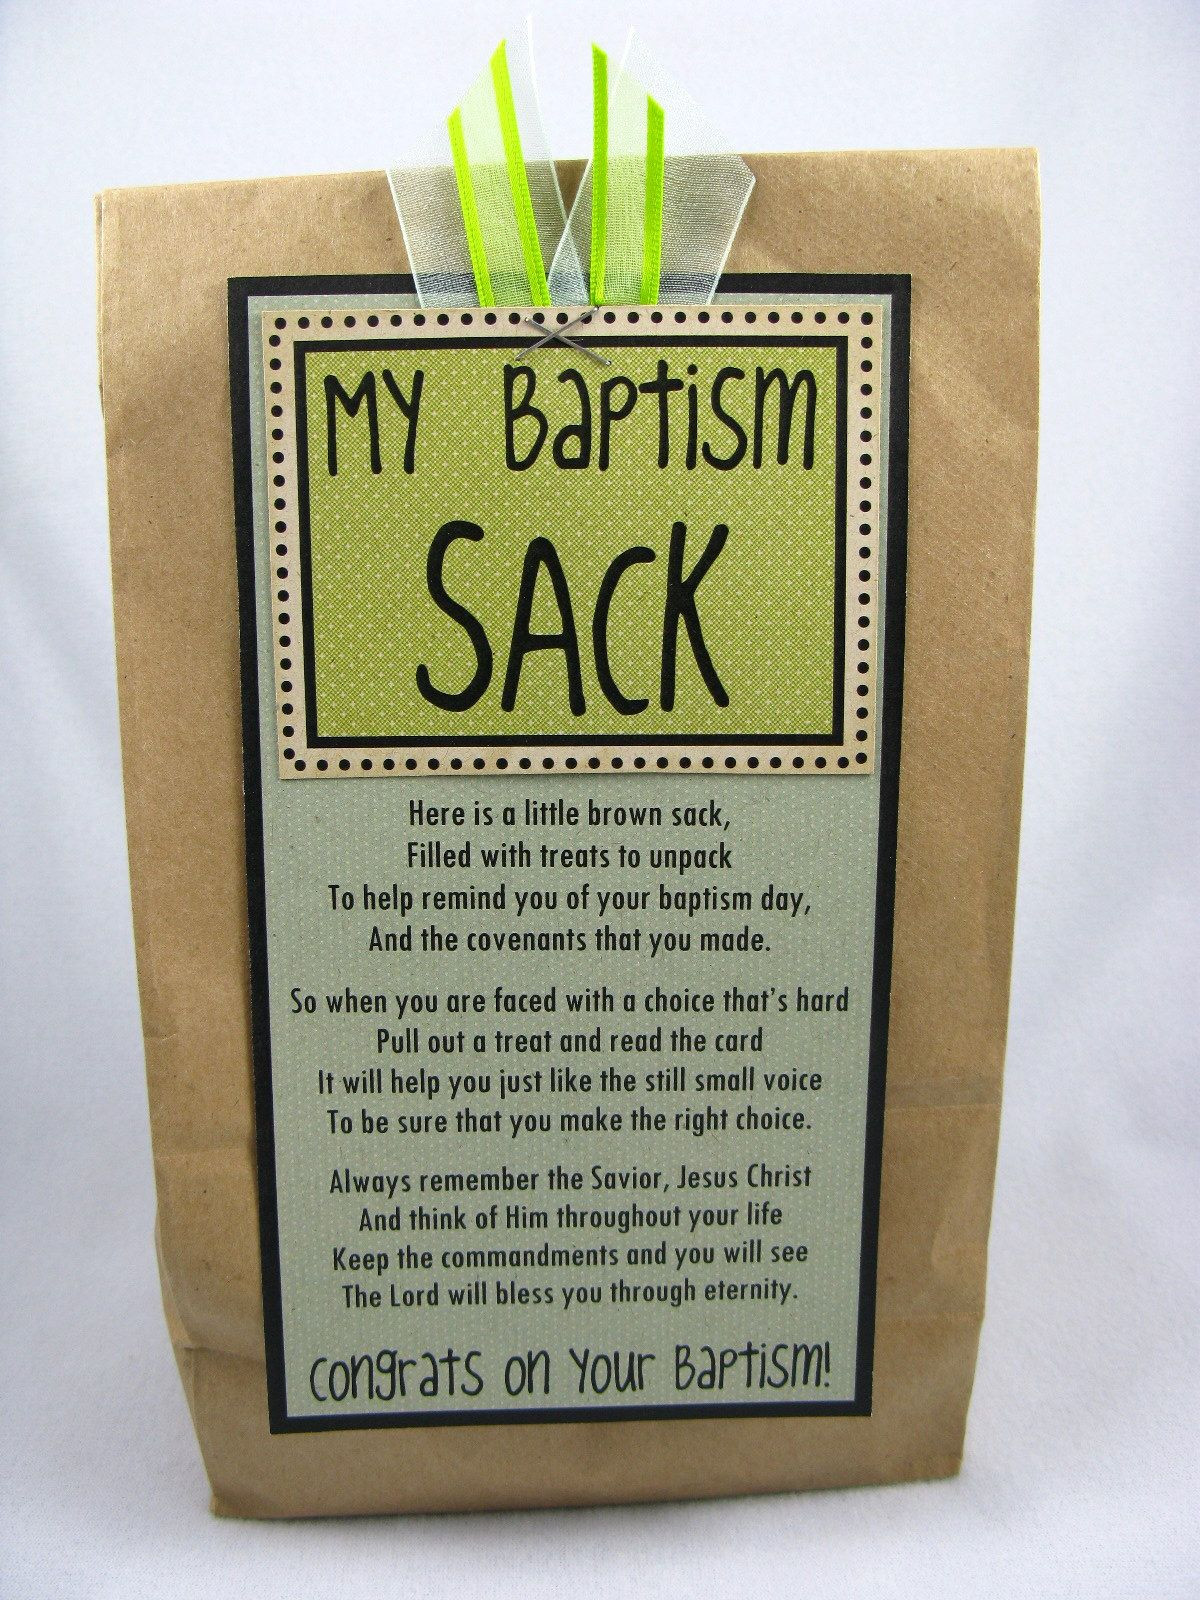 Gift Ideas For A Baby'S Baptism
 Here is a little brown sack Filled with treats to unpack